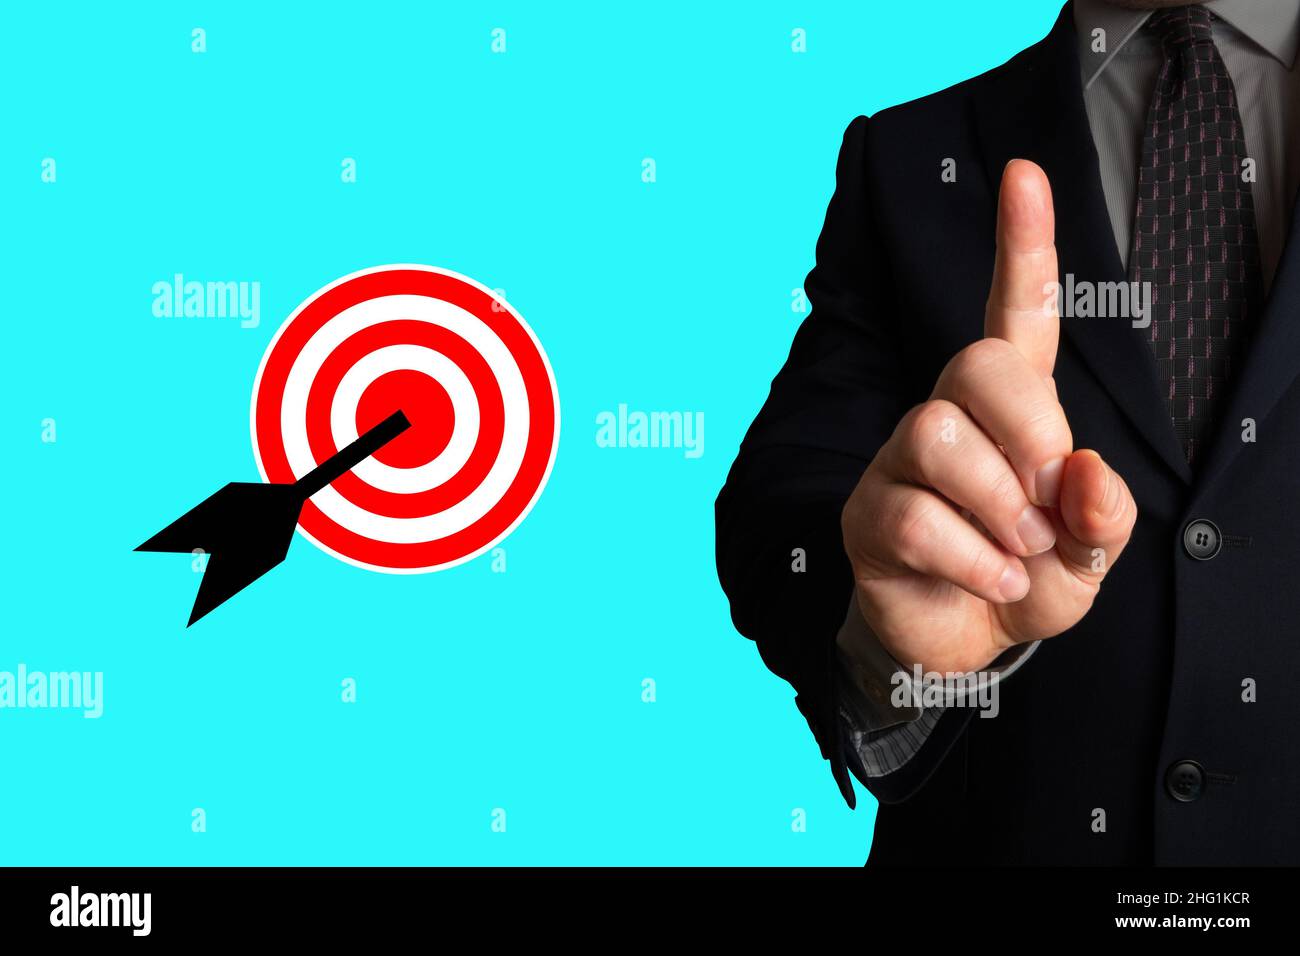 Raised finger of a businessman stressing completion or achievment or reaching of a goal, objective or target (bullseye). Symbol of success. Stock Photo